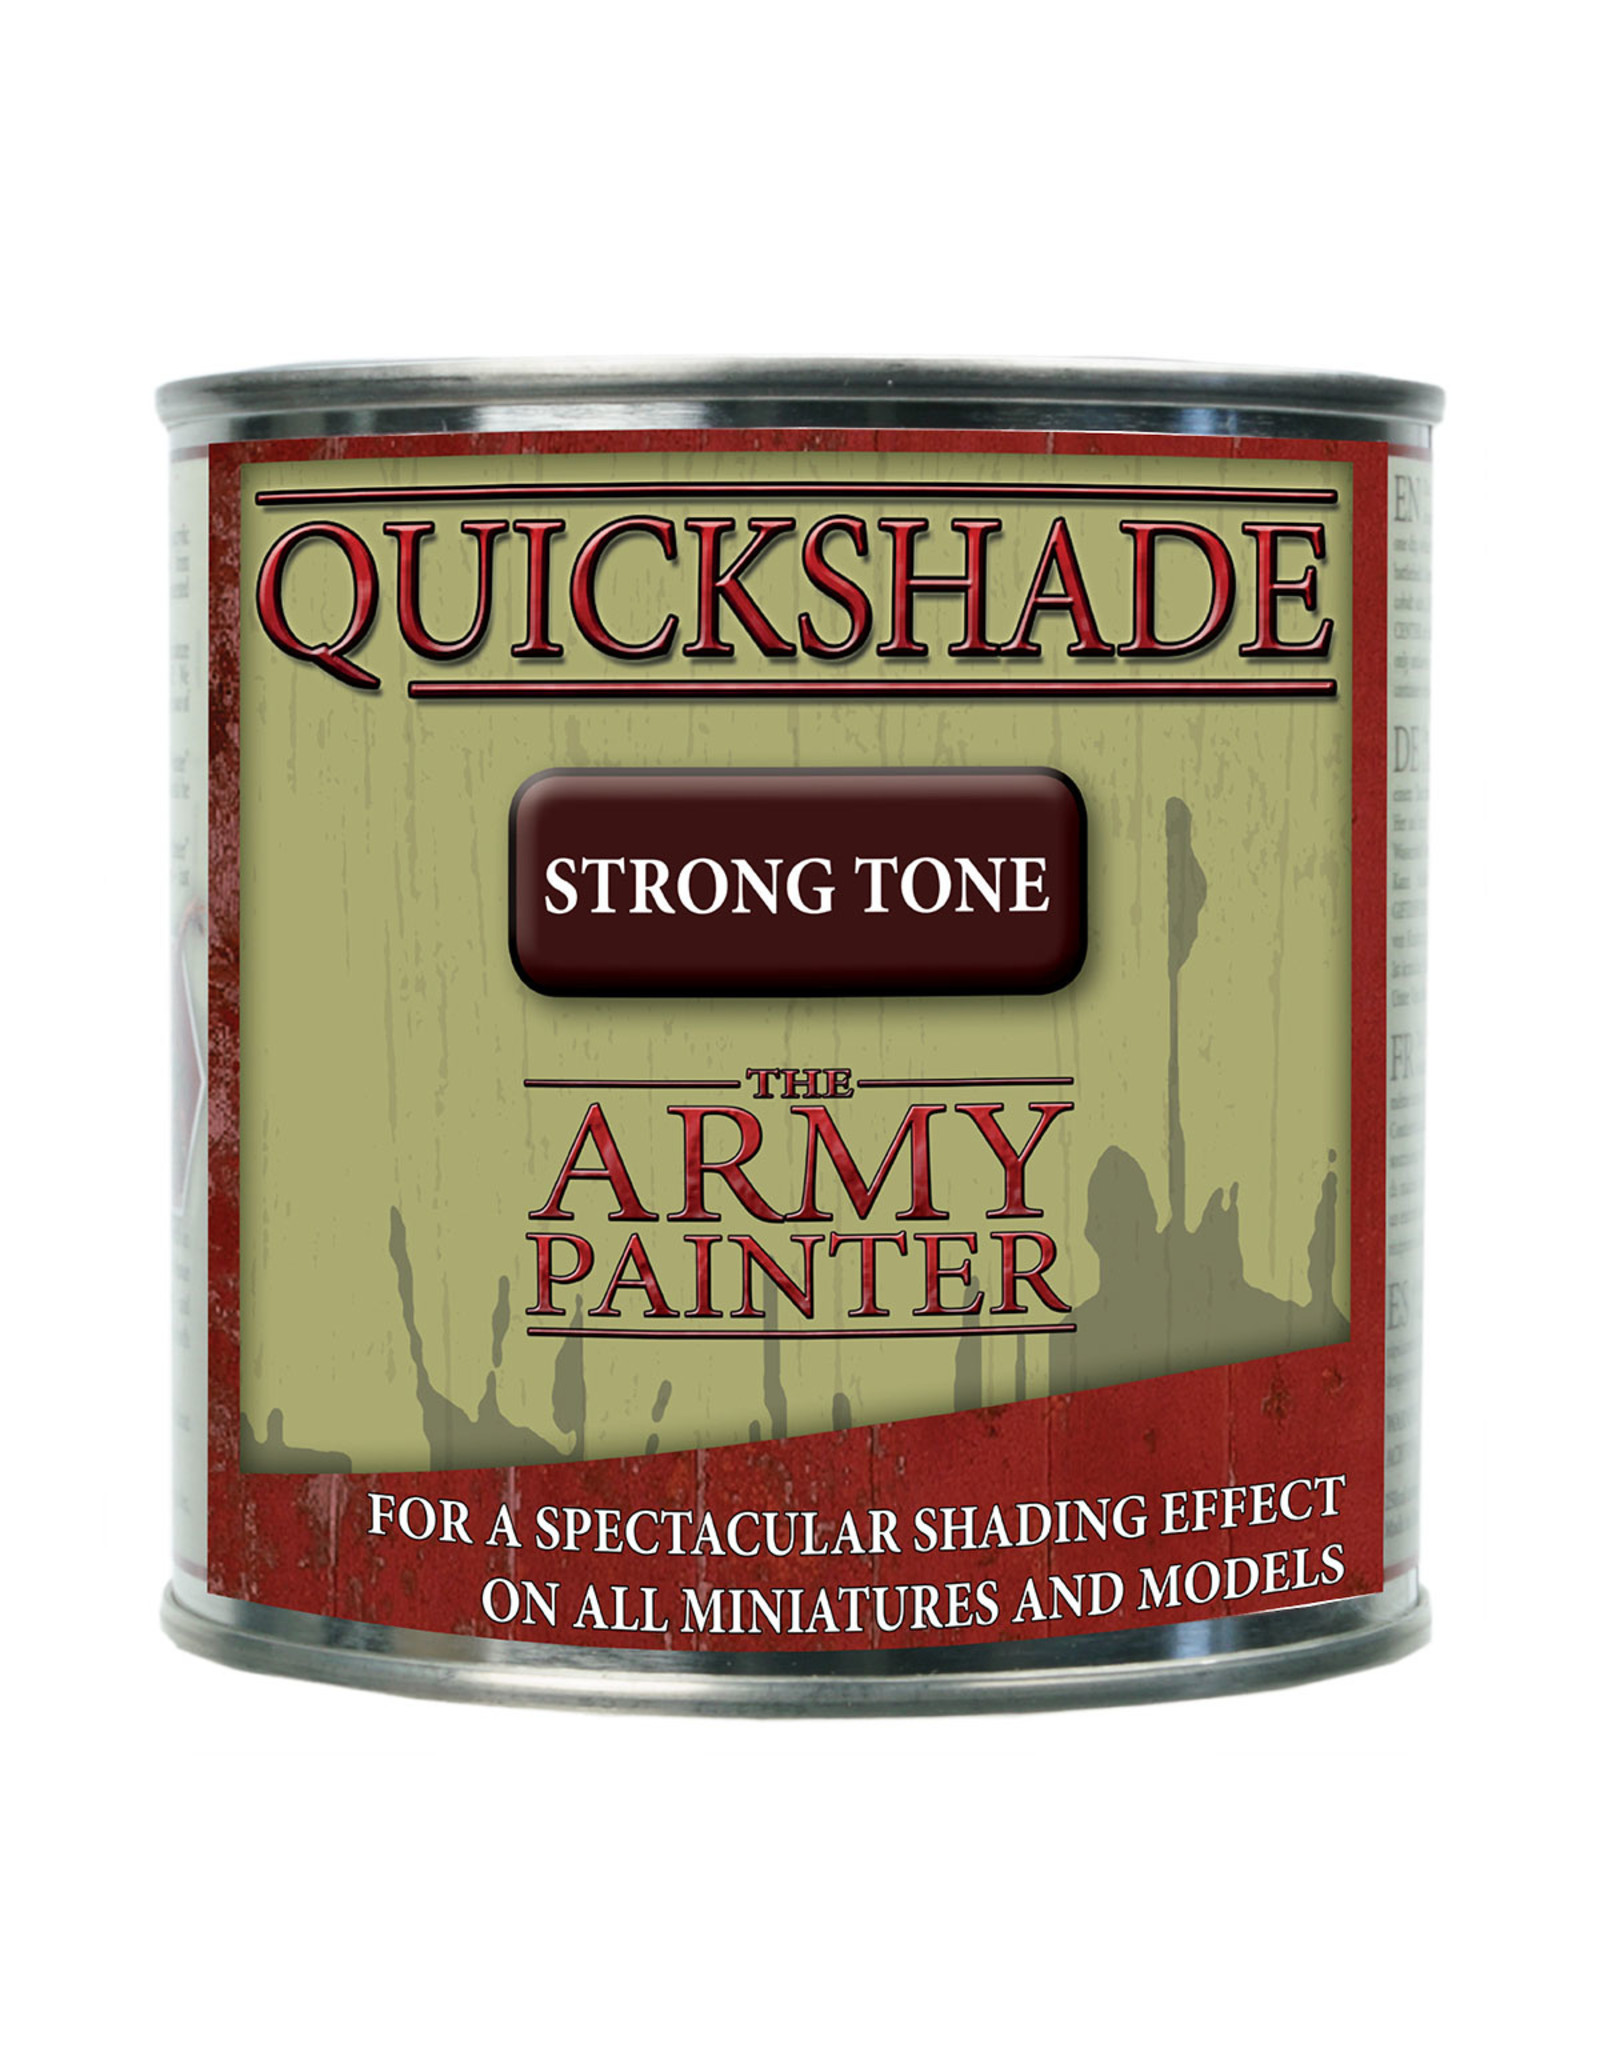 The Army Painter QS1002 Quickshade Strong Tone